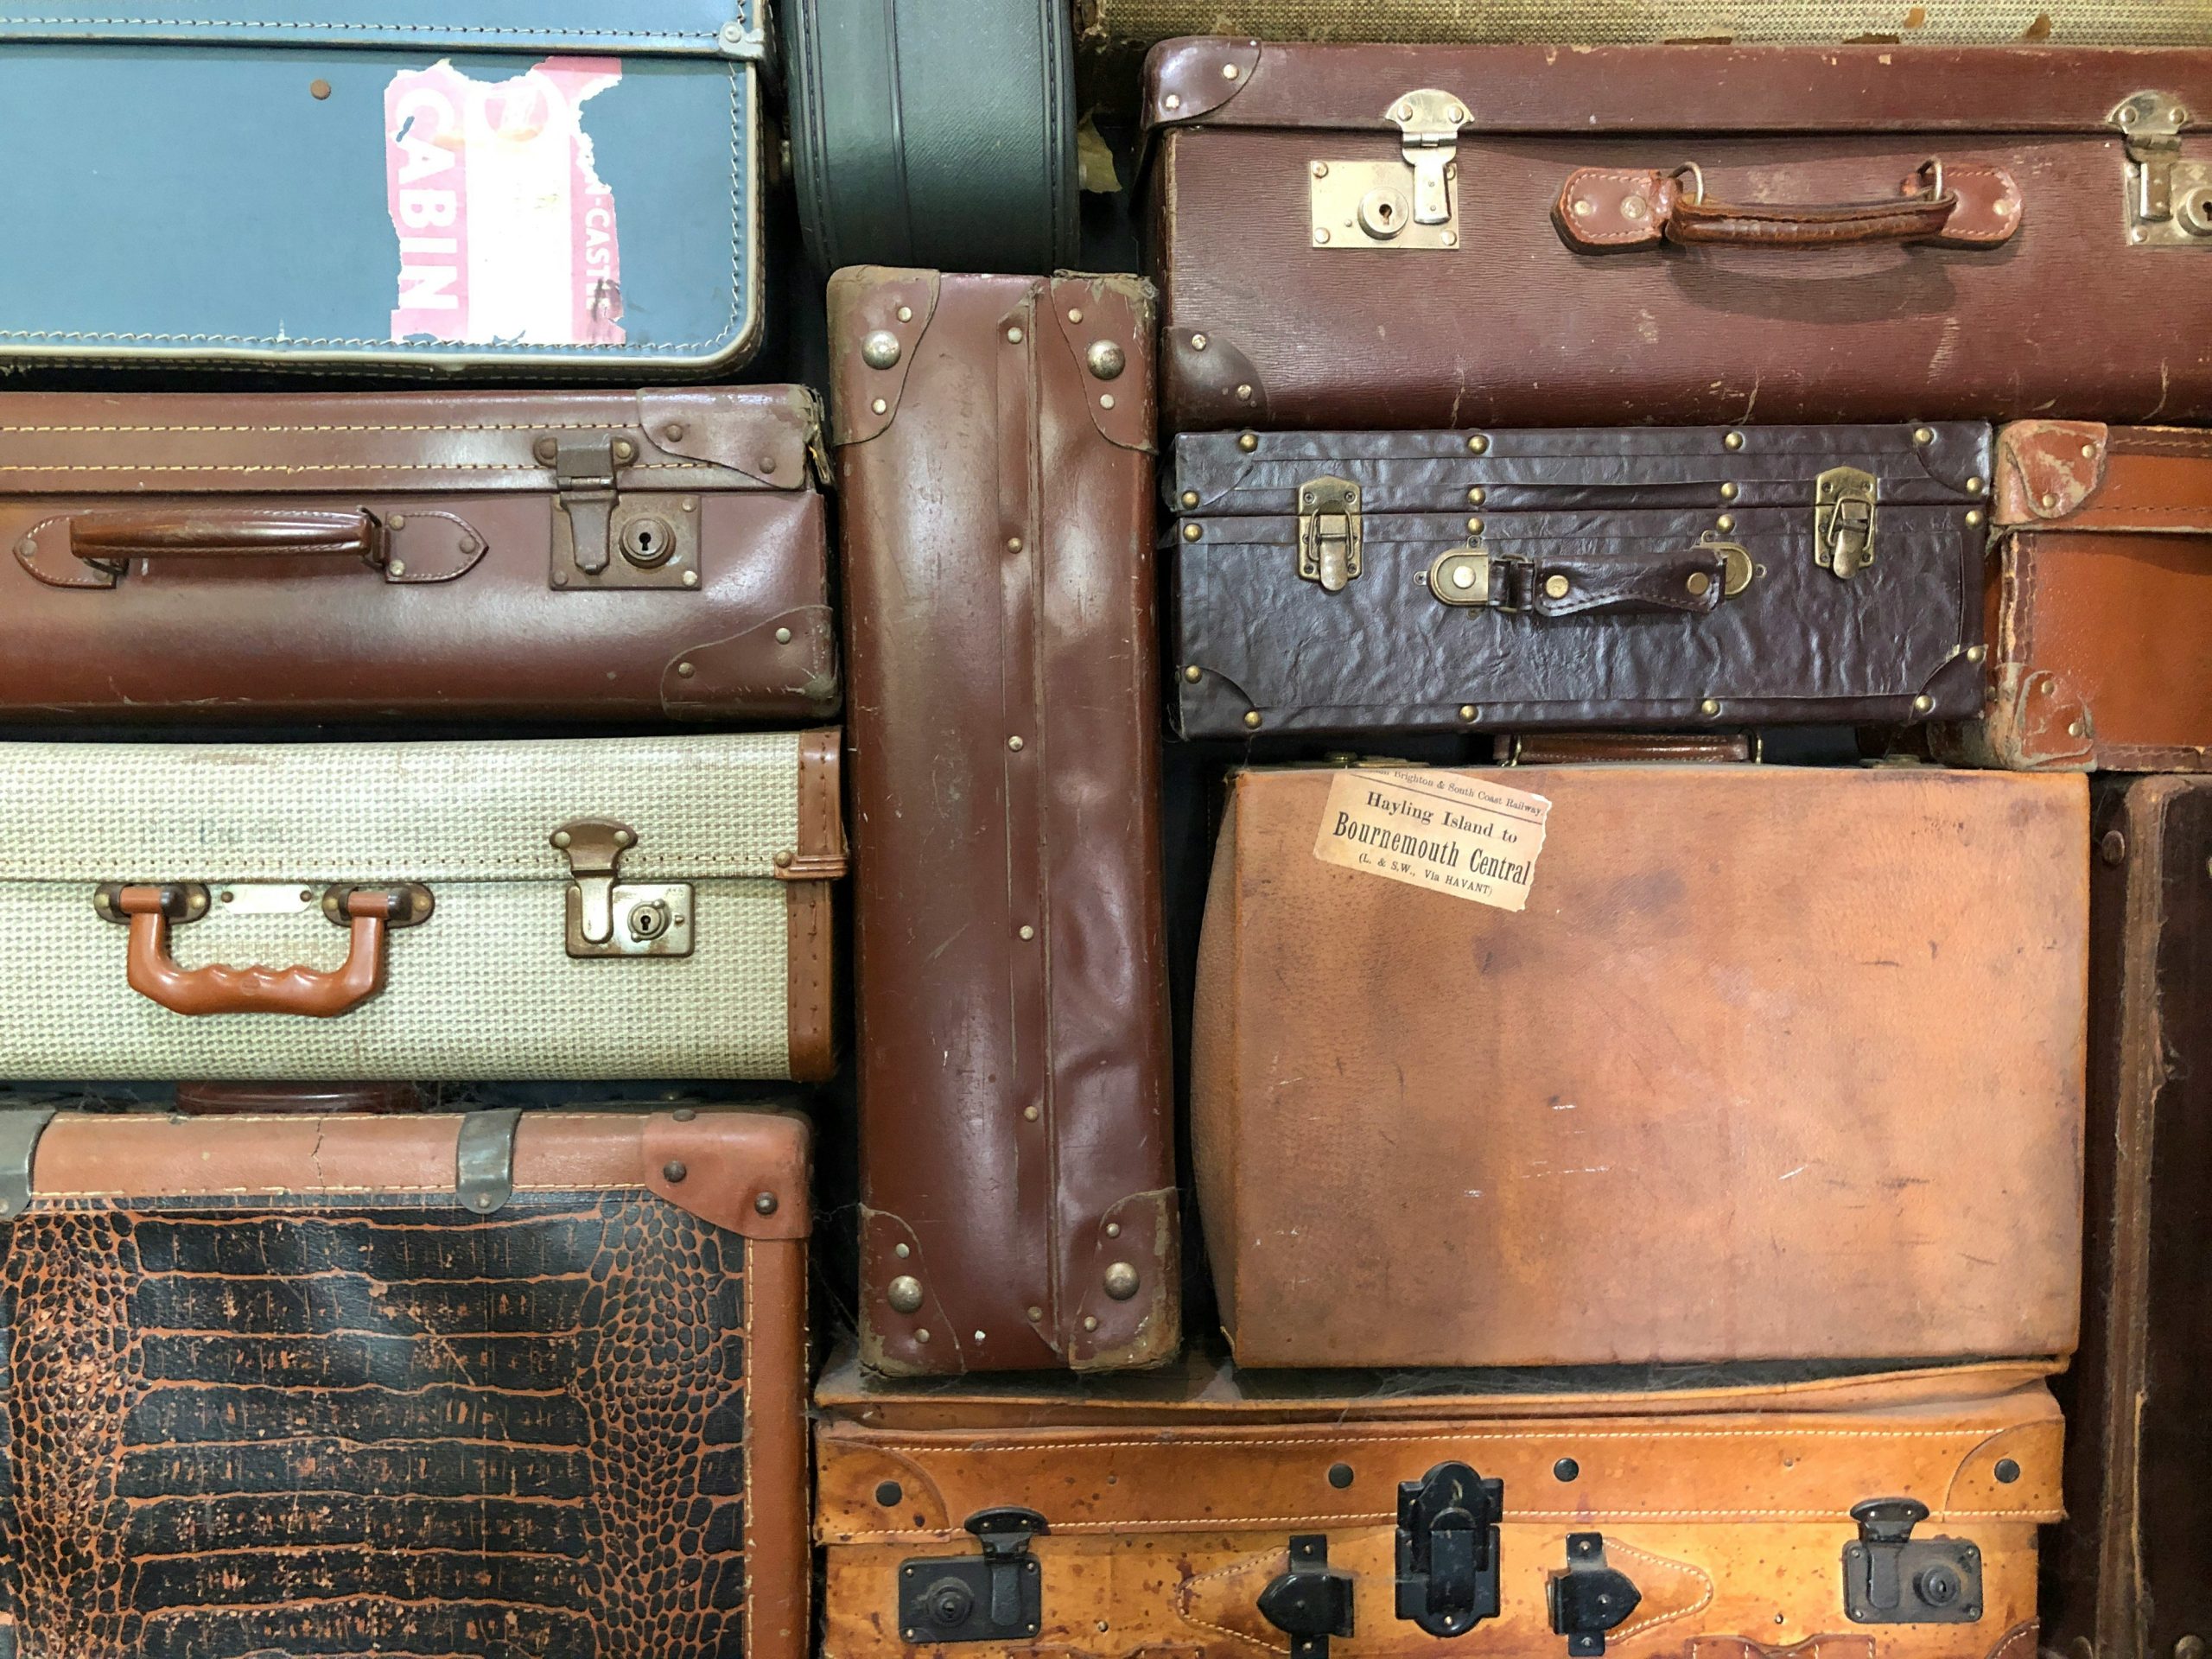 avoid these common luggage mistakes to have a stress-free travel experience. learn how to pack efficiently and avoid overpacking or forgetting essential items.